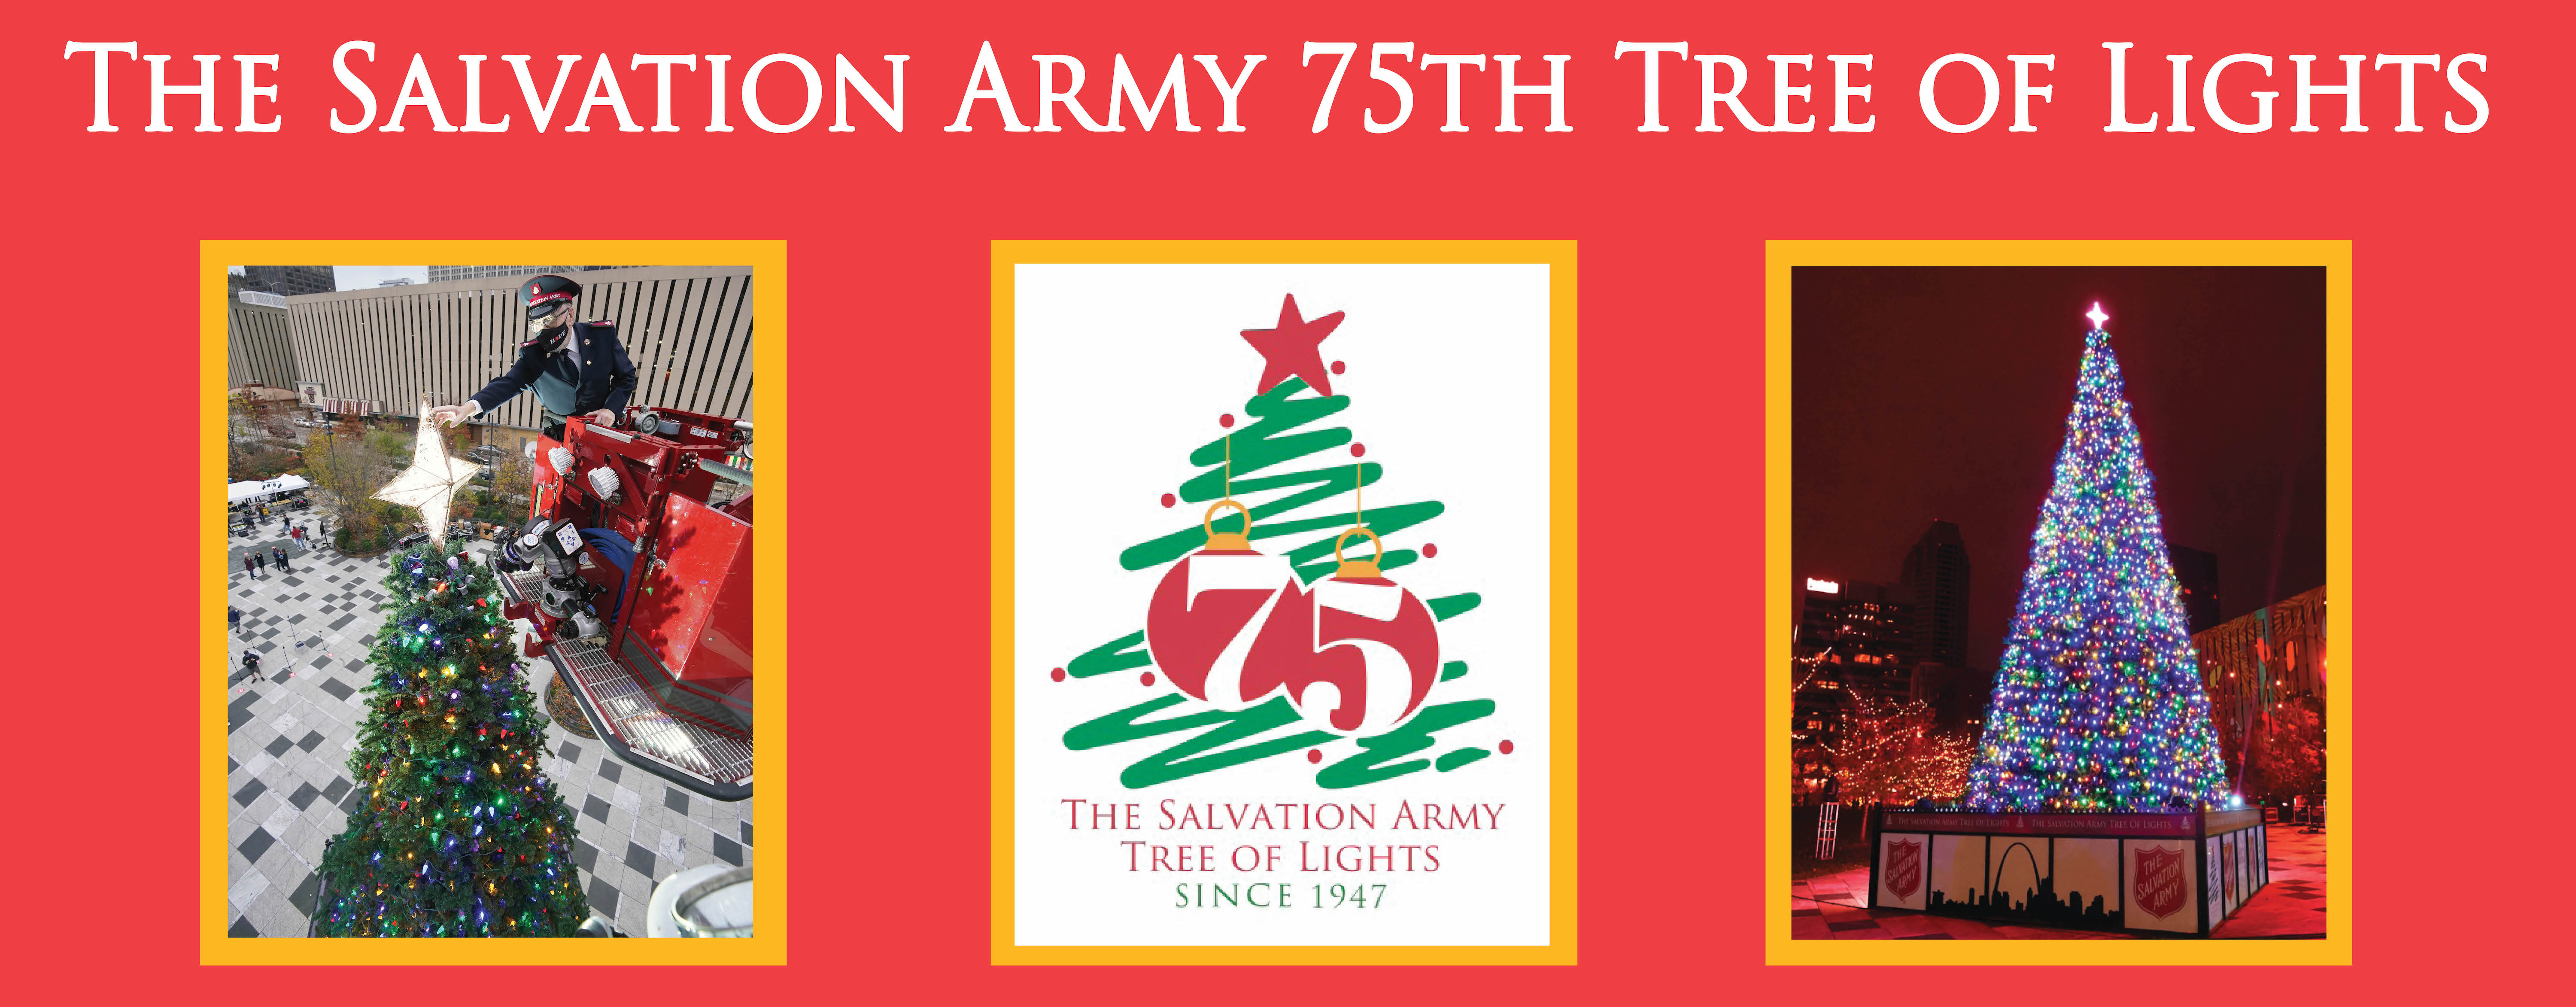 The Salvation Army Tree of Lights 75th in 2022 Campaign